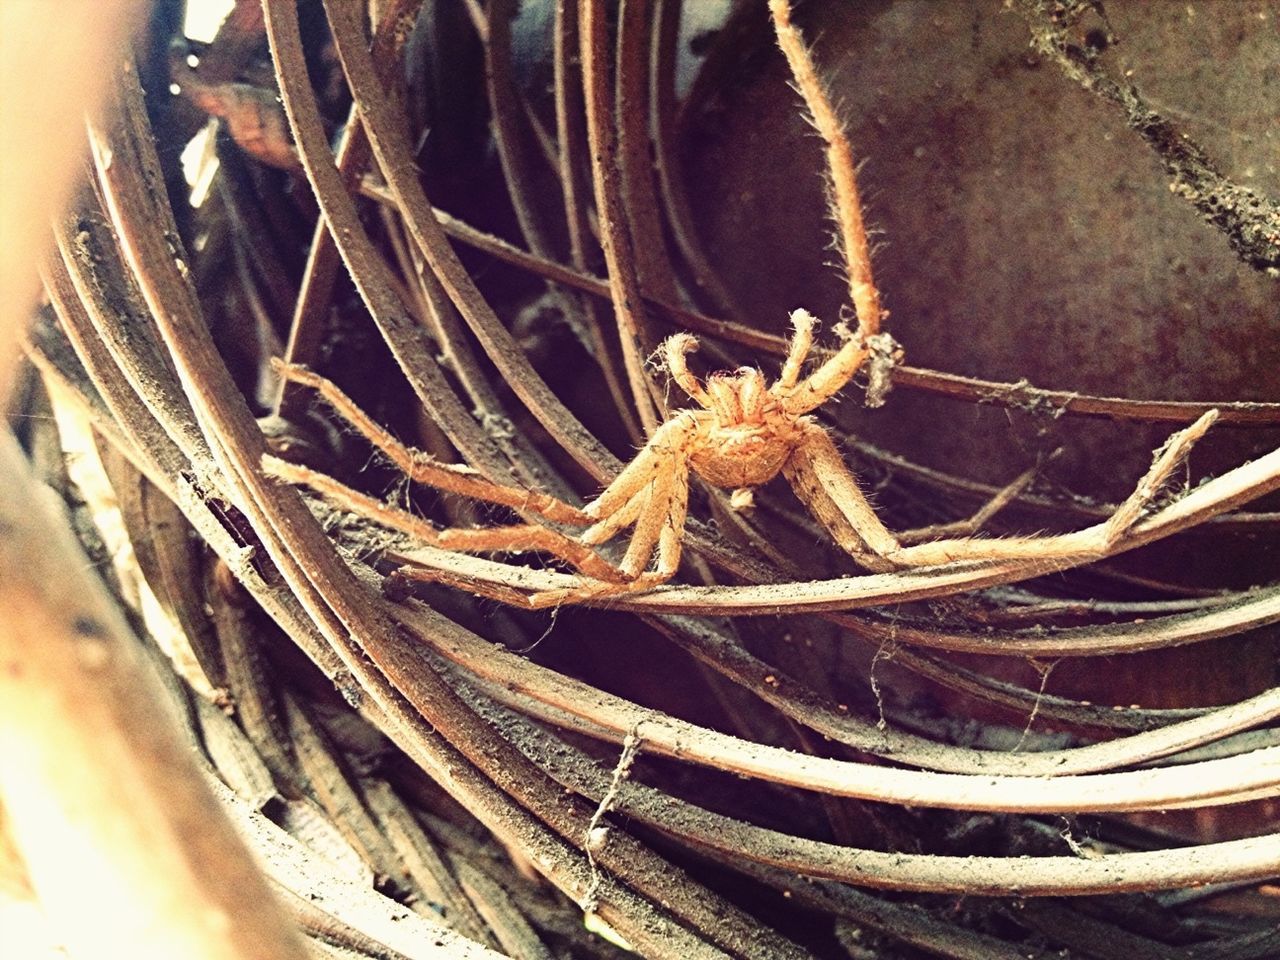 animal themes, one animal, close-up, wildlife, insect, animals in the wild, indoors, spider, high angle view, selective focus, spider web, animal body part, detail, part of, no people, nature, day, twig, wood - material